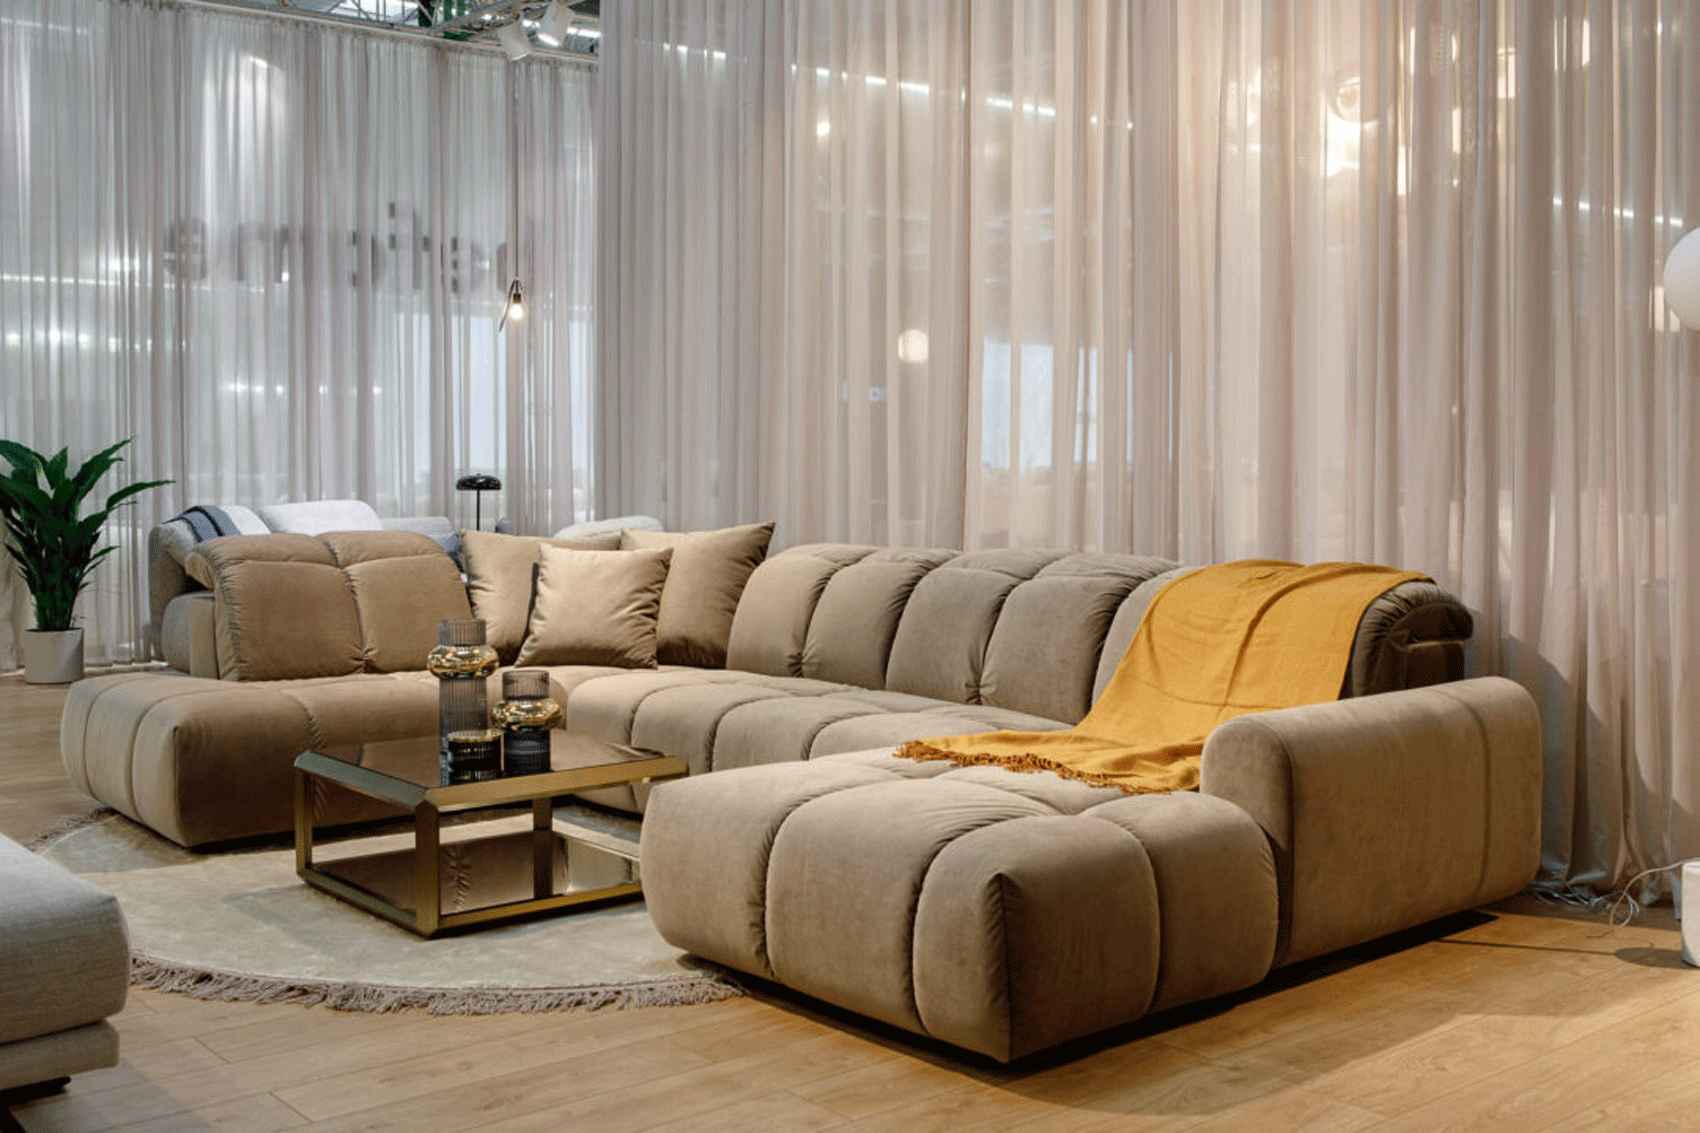 Living Room Furniture Sleepers Sofas Loveseats and Chairs Bullet U-shaped Sectional